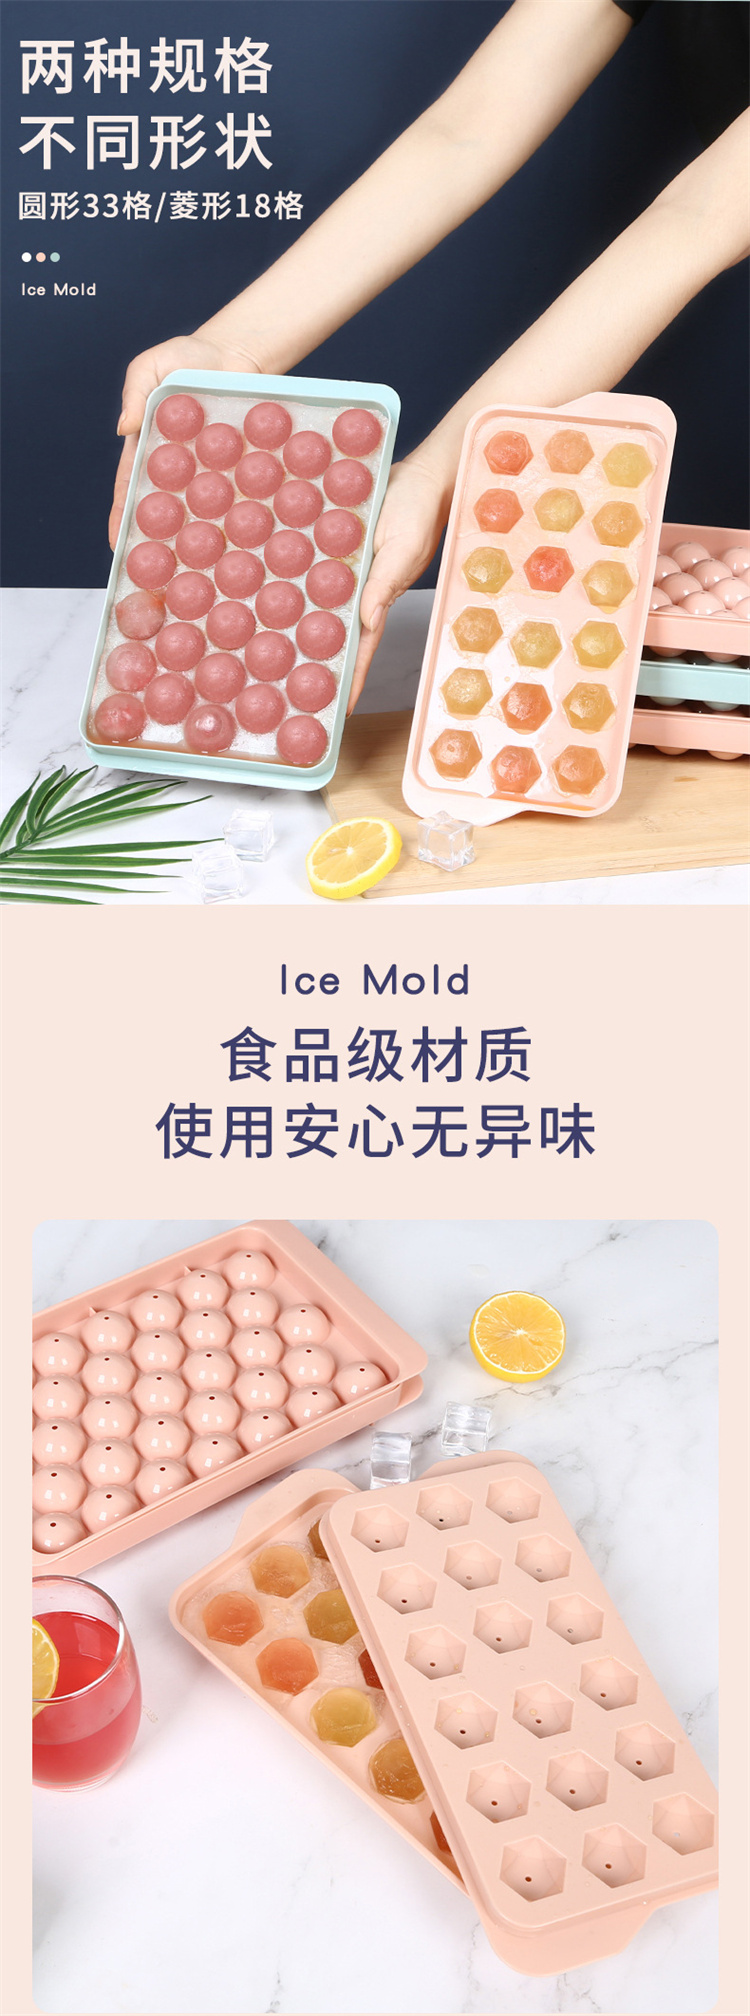 Popular Amazon Best Selling Flexible Ice Cube Tray with Lid Free Easy Release Ice Cube Molds Make Mini Ice Cubes